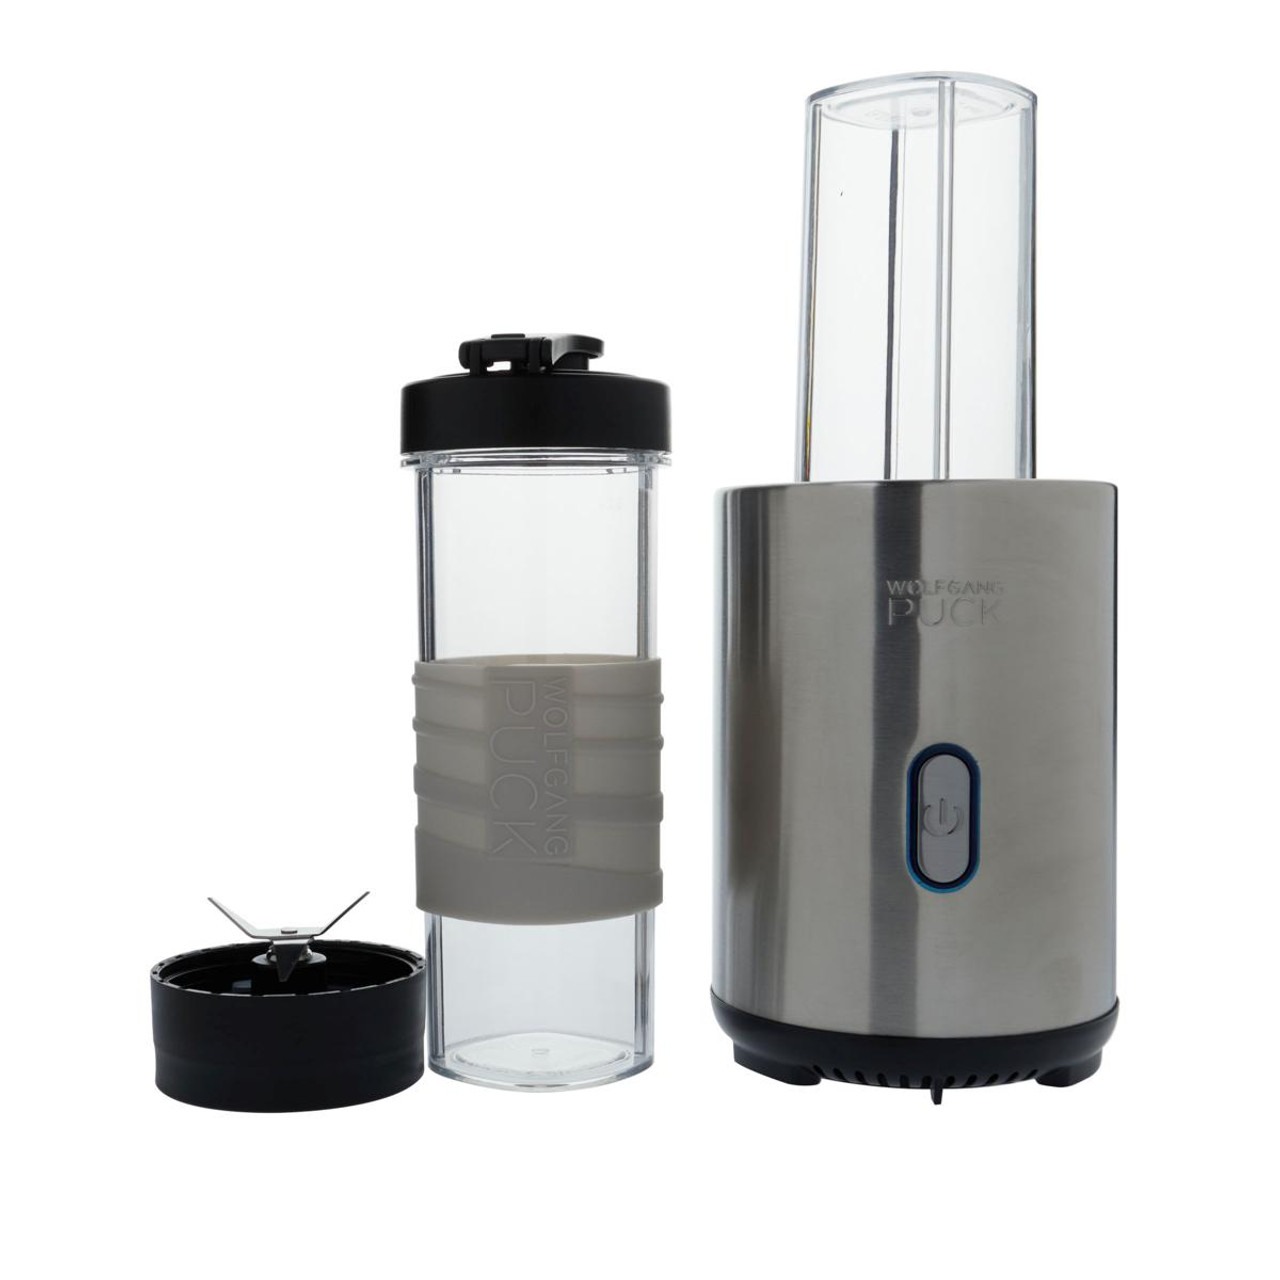 Wolfgang Puck Electric 2-in-1 Dual Salt And Pepper Grinder With